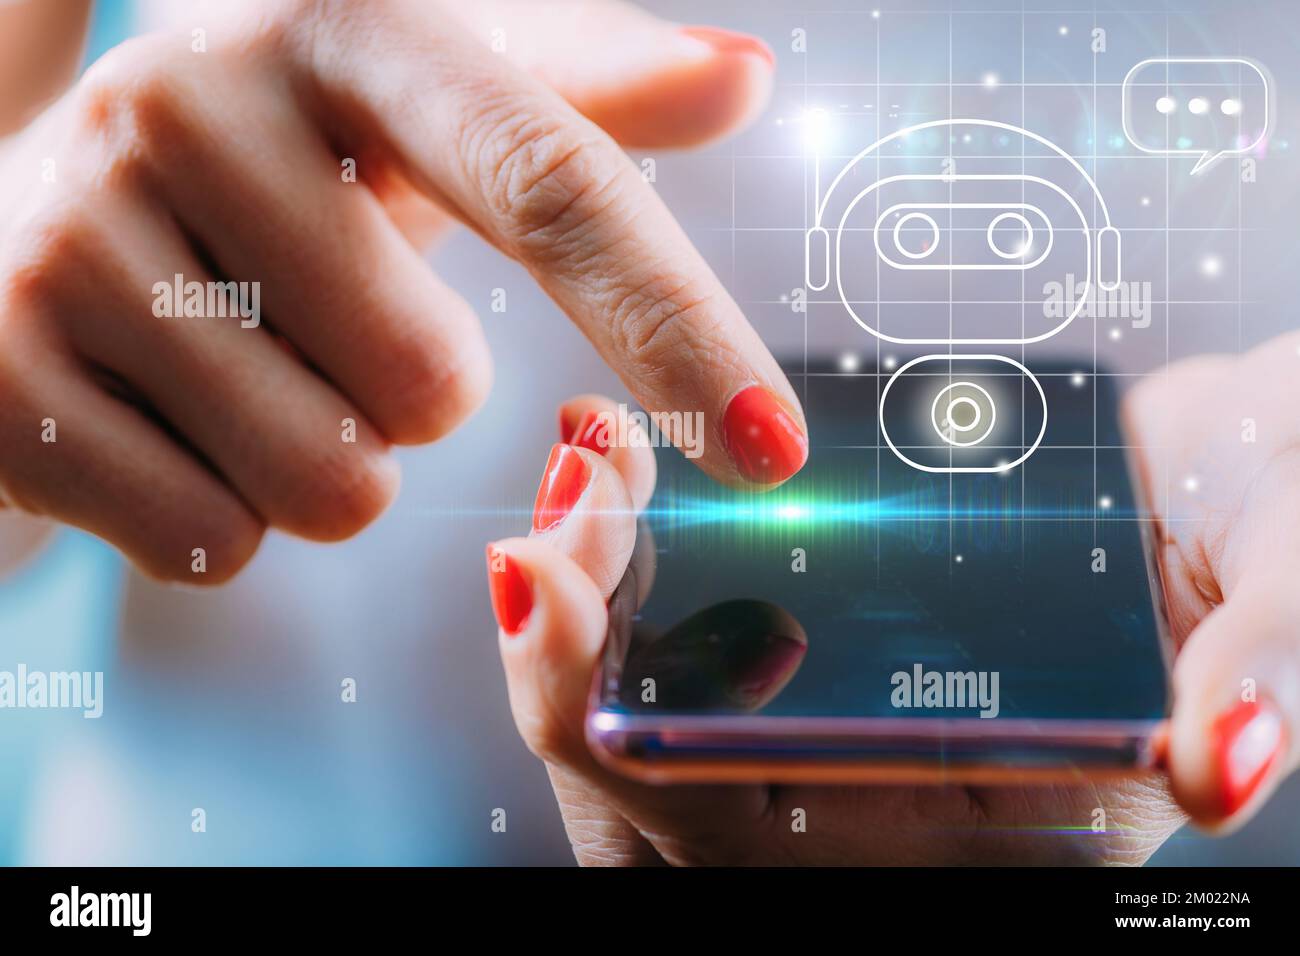 Woman using a digital chatbot on a smartphone Stock Photo